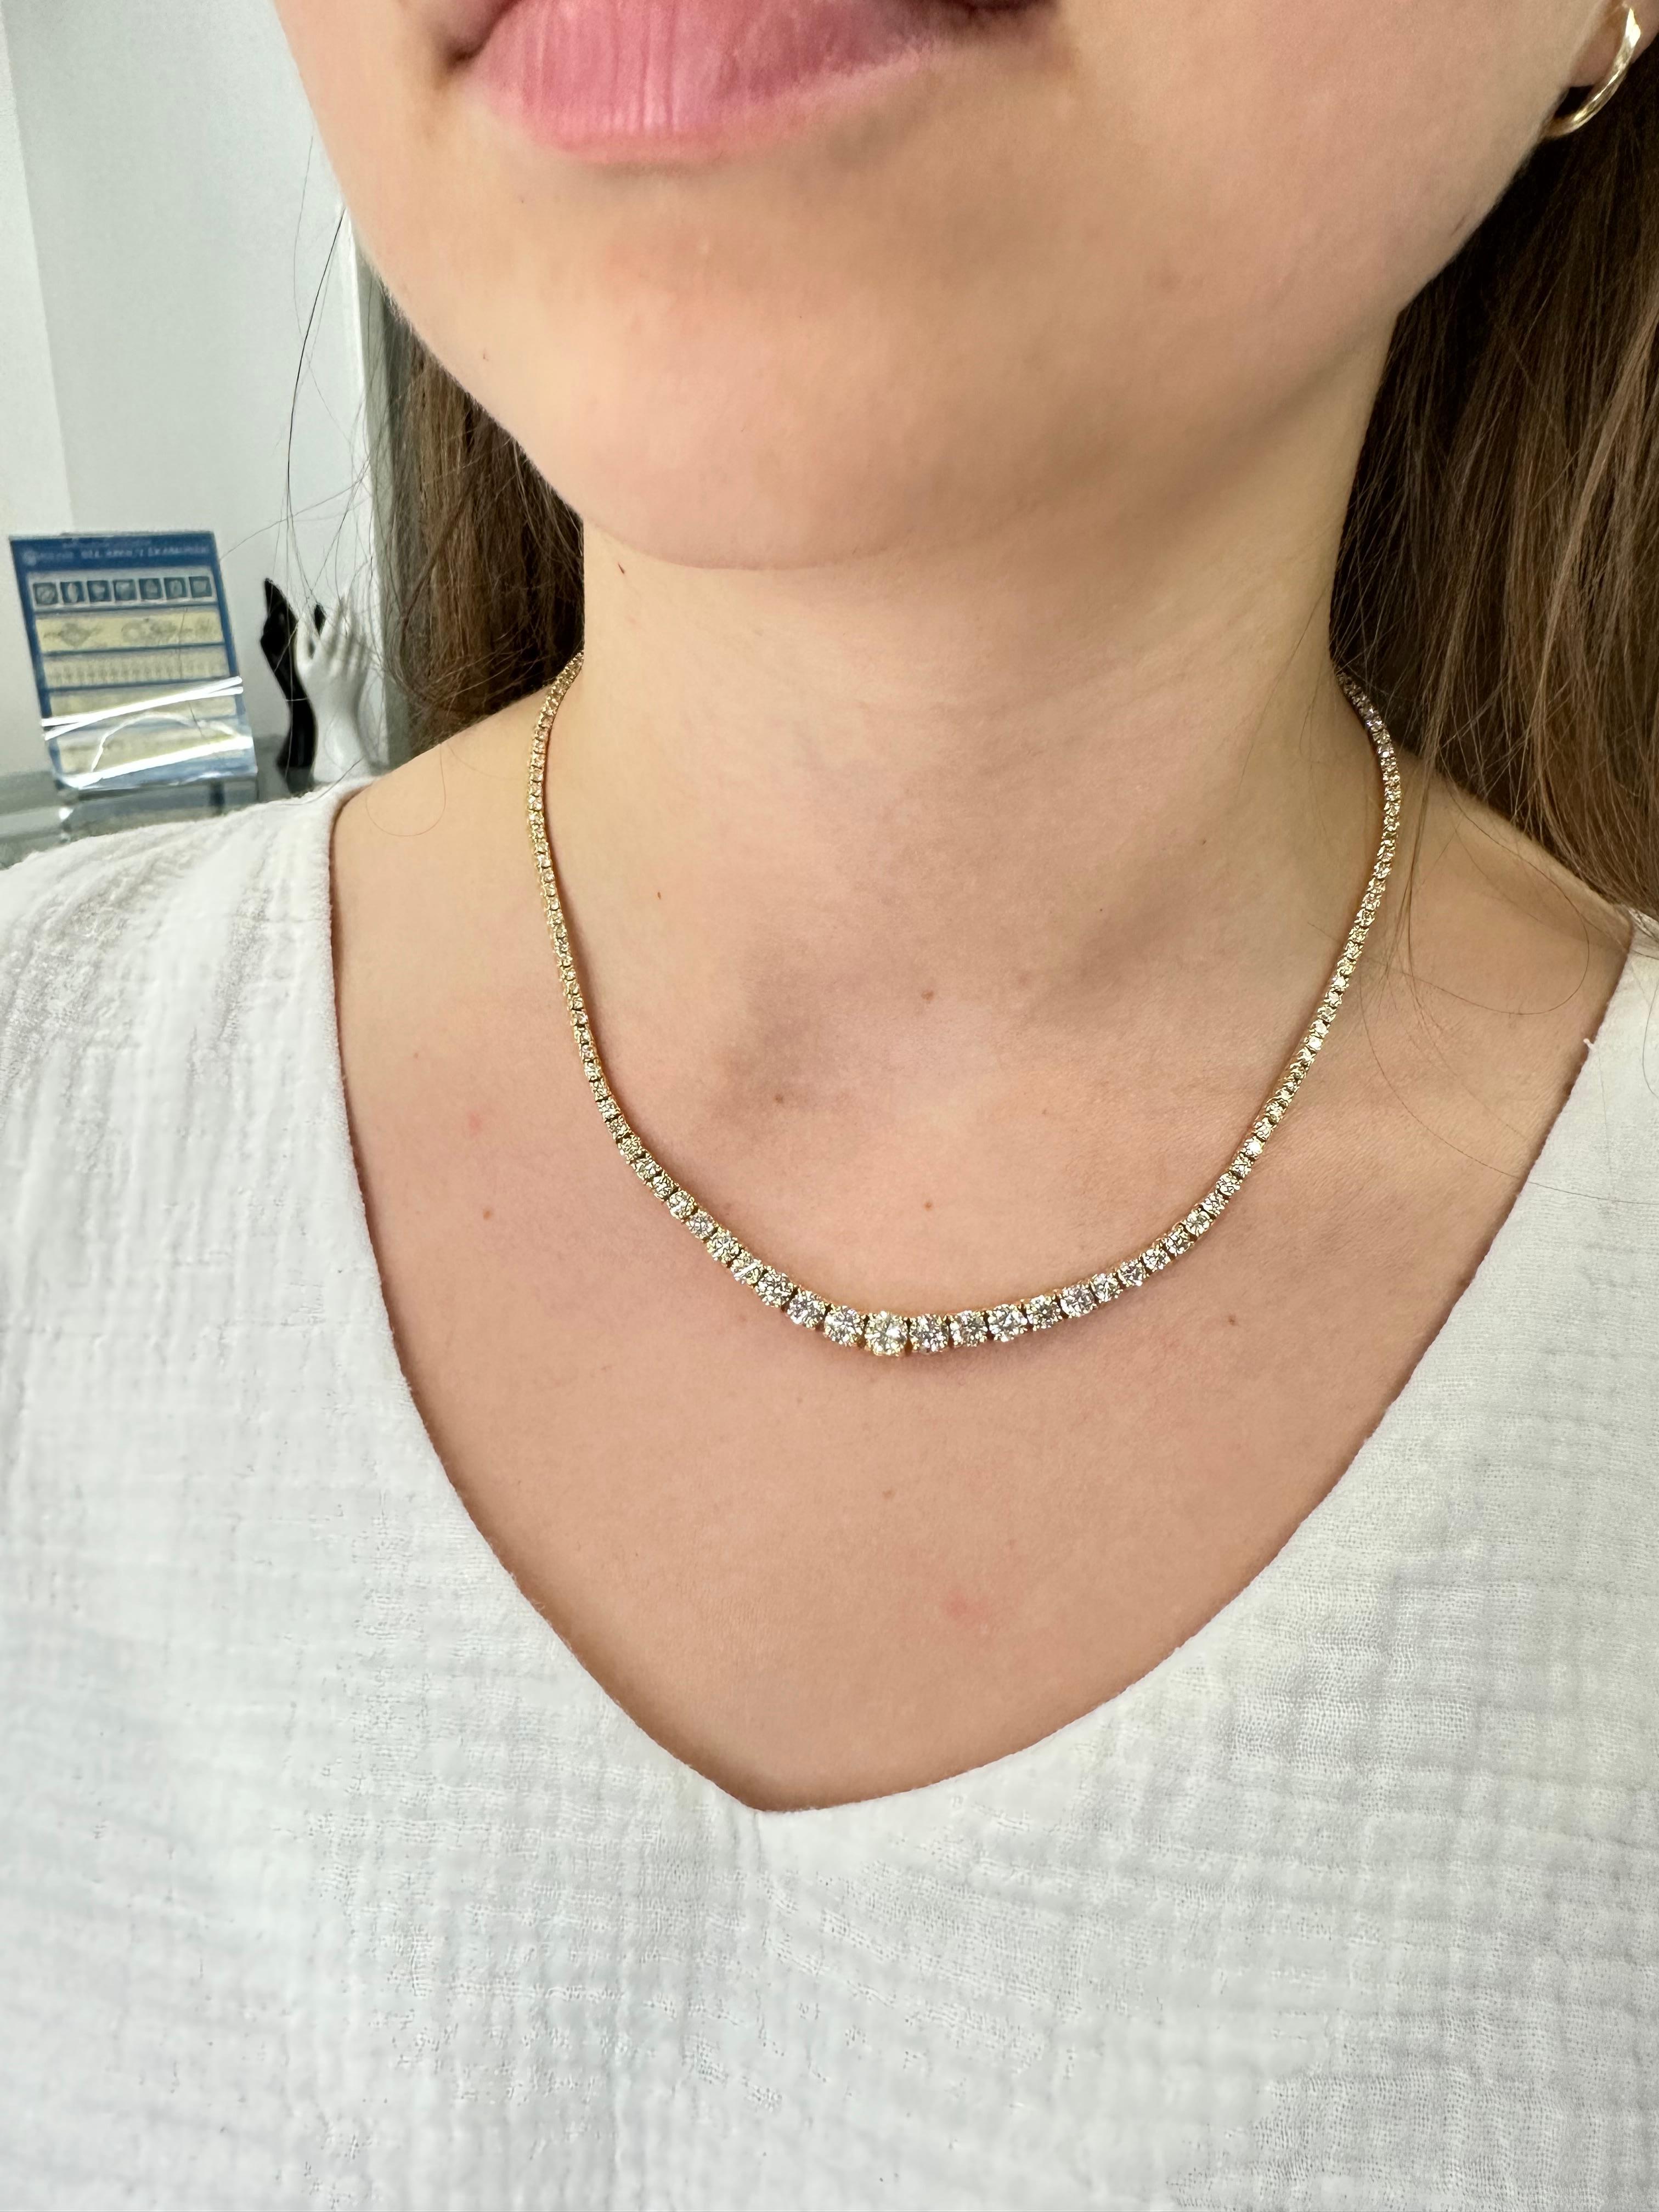 Introducing the stunning 7.27 Carat Graduated Diamond Tennis Necklace, set in luxurious 14K Yellow Gold with a classic 4-prong setting. This exquisite piece features a range of sparkling diamonds, each carefully selected and expertly crafted to